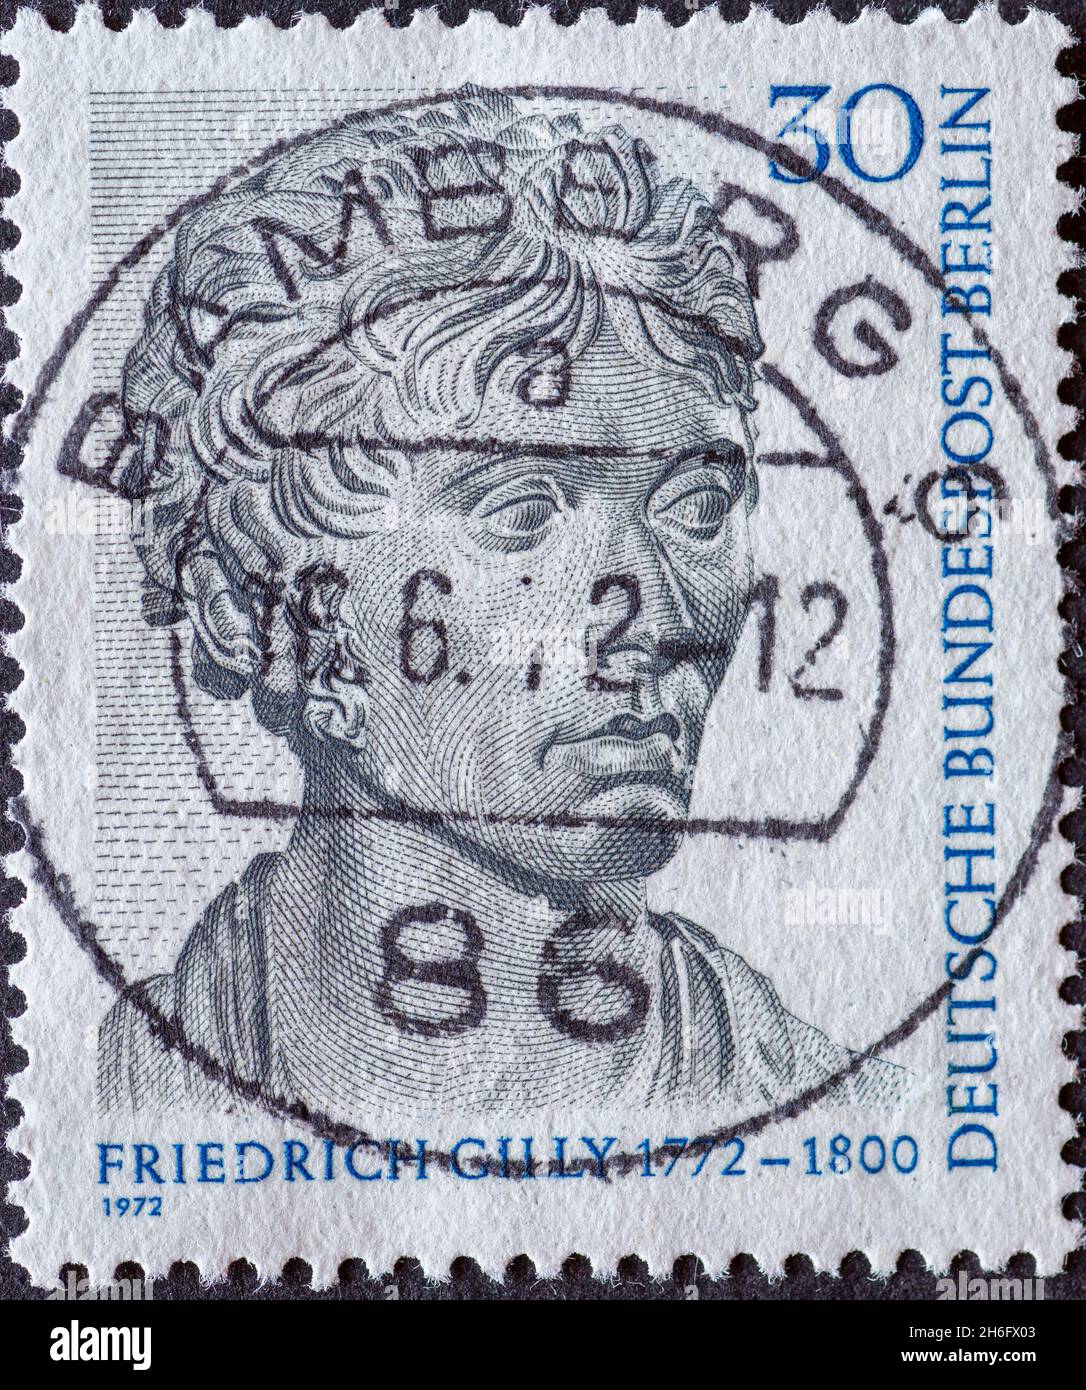 GERMANY, Berlin - CIRCA 1972: a postage stamp from Germany, Berlin showing a portrait of the architect and master builder Friedrich Gilly 1772 - 1800 Stock Photo